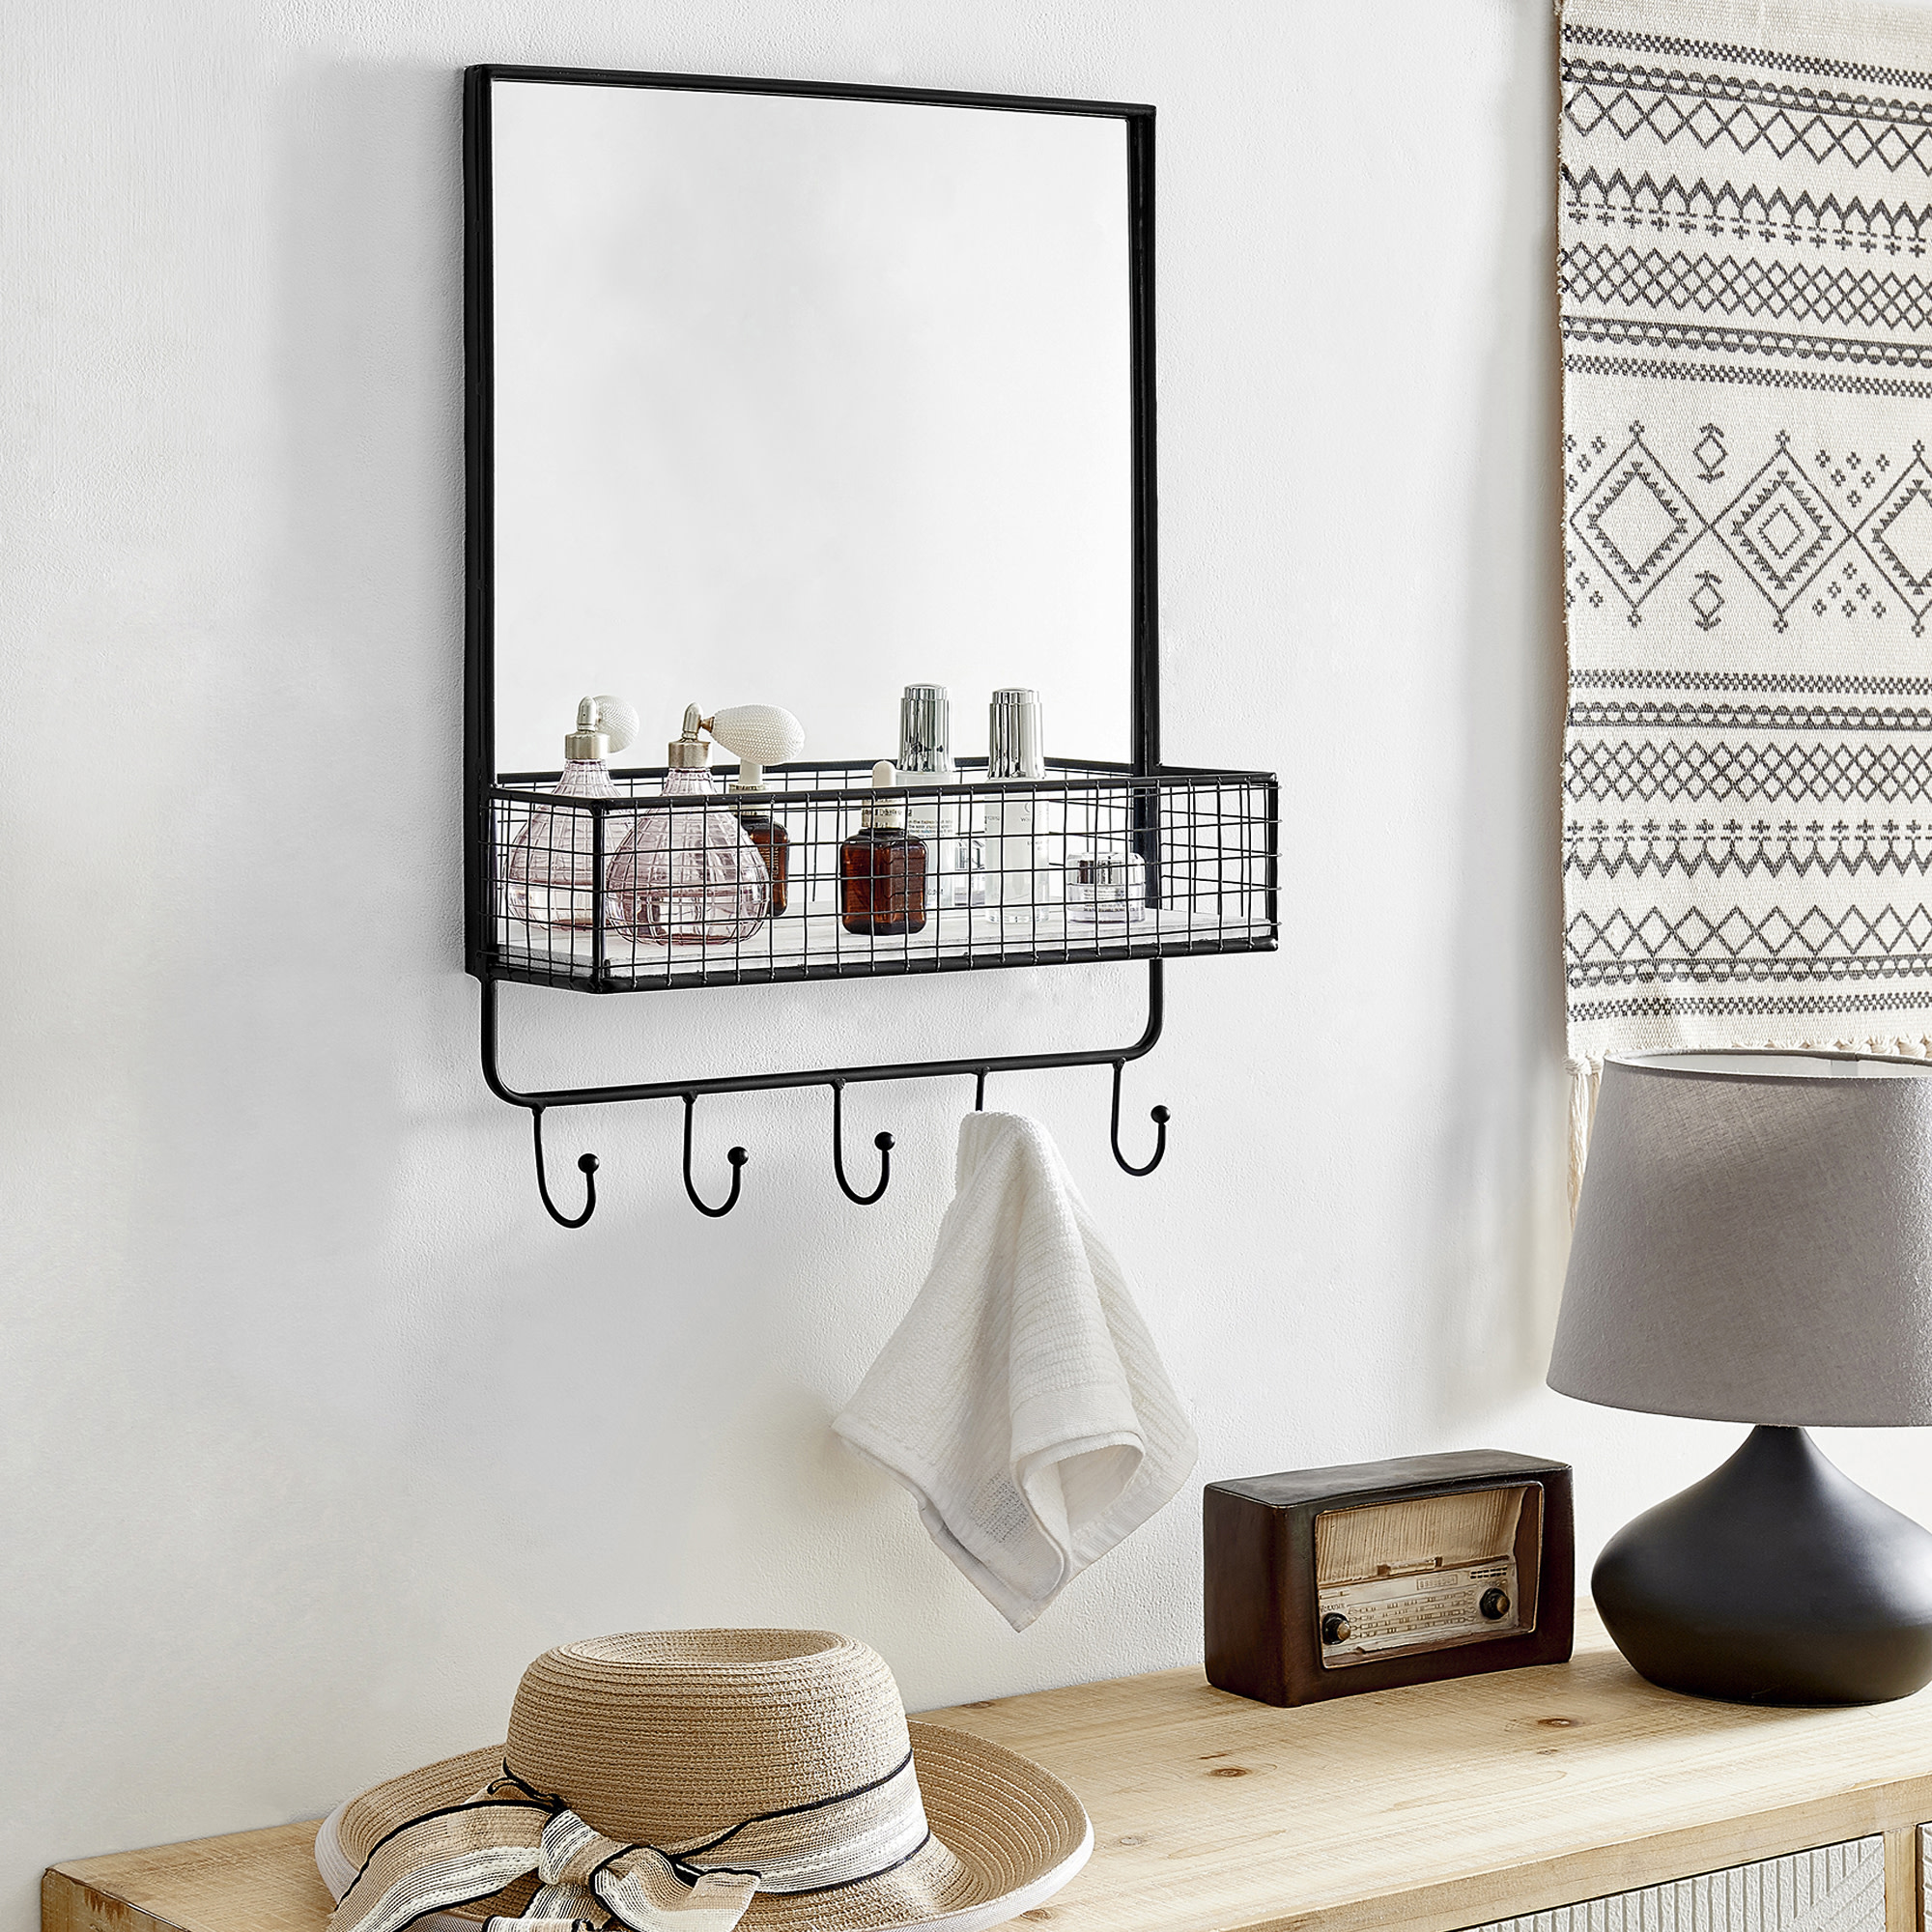 FirsTime & Co. Black Mabel Organizer Wall Mirror With Hooks, Industrial, Rectangular, 16.5 x 5 x 24.5 in - image 1 of 5